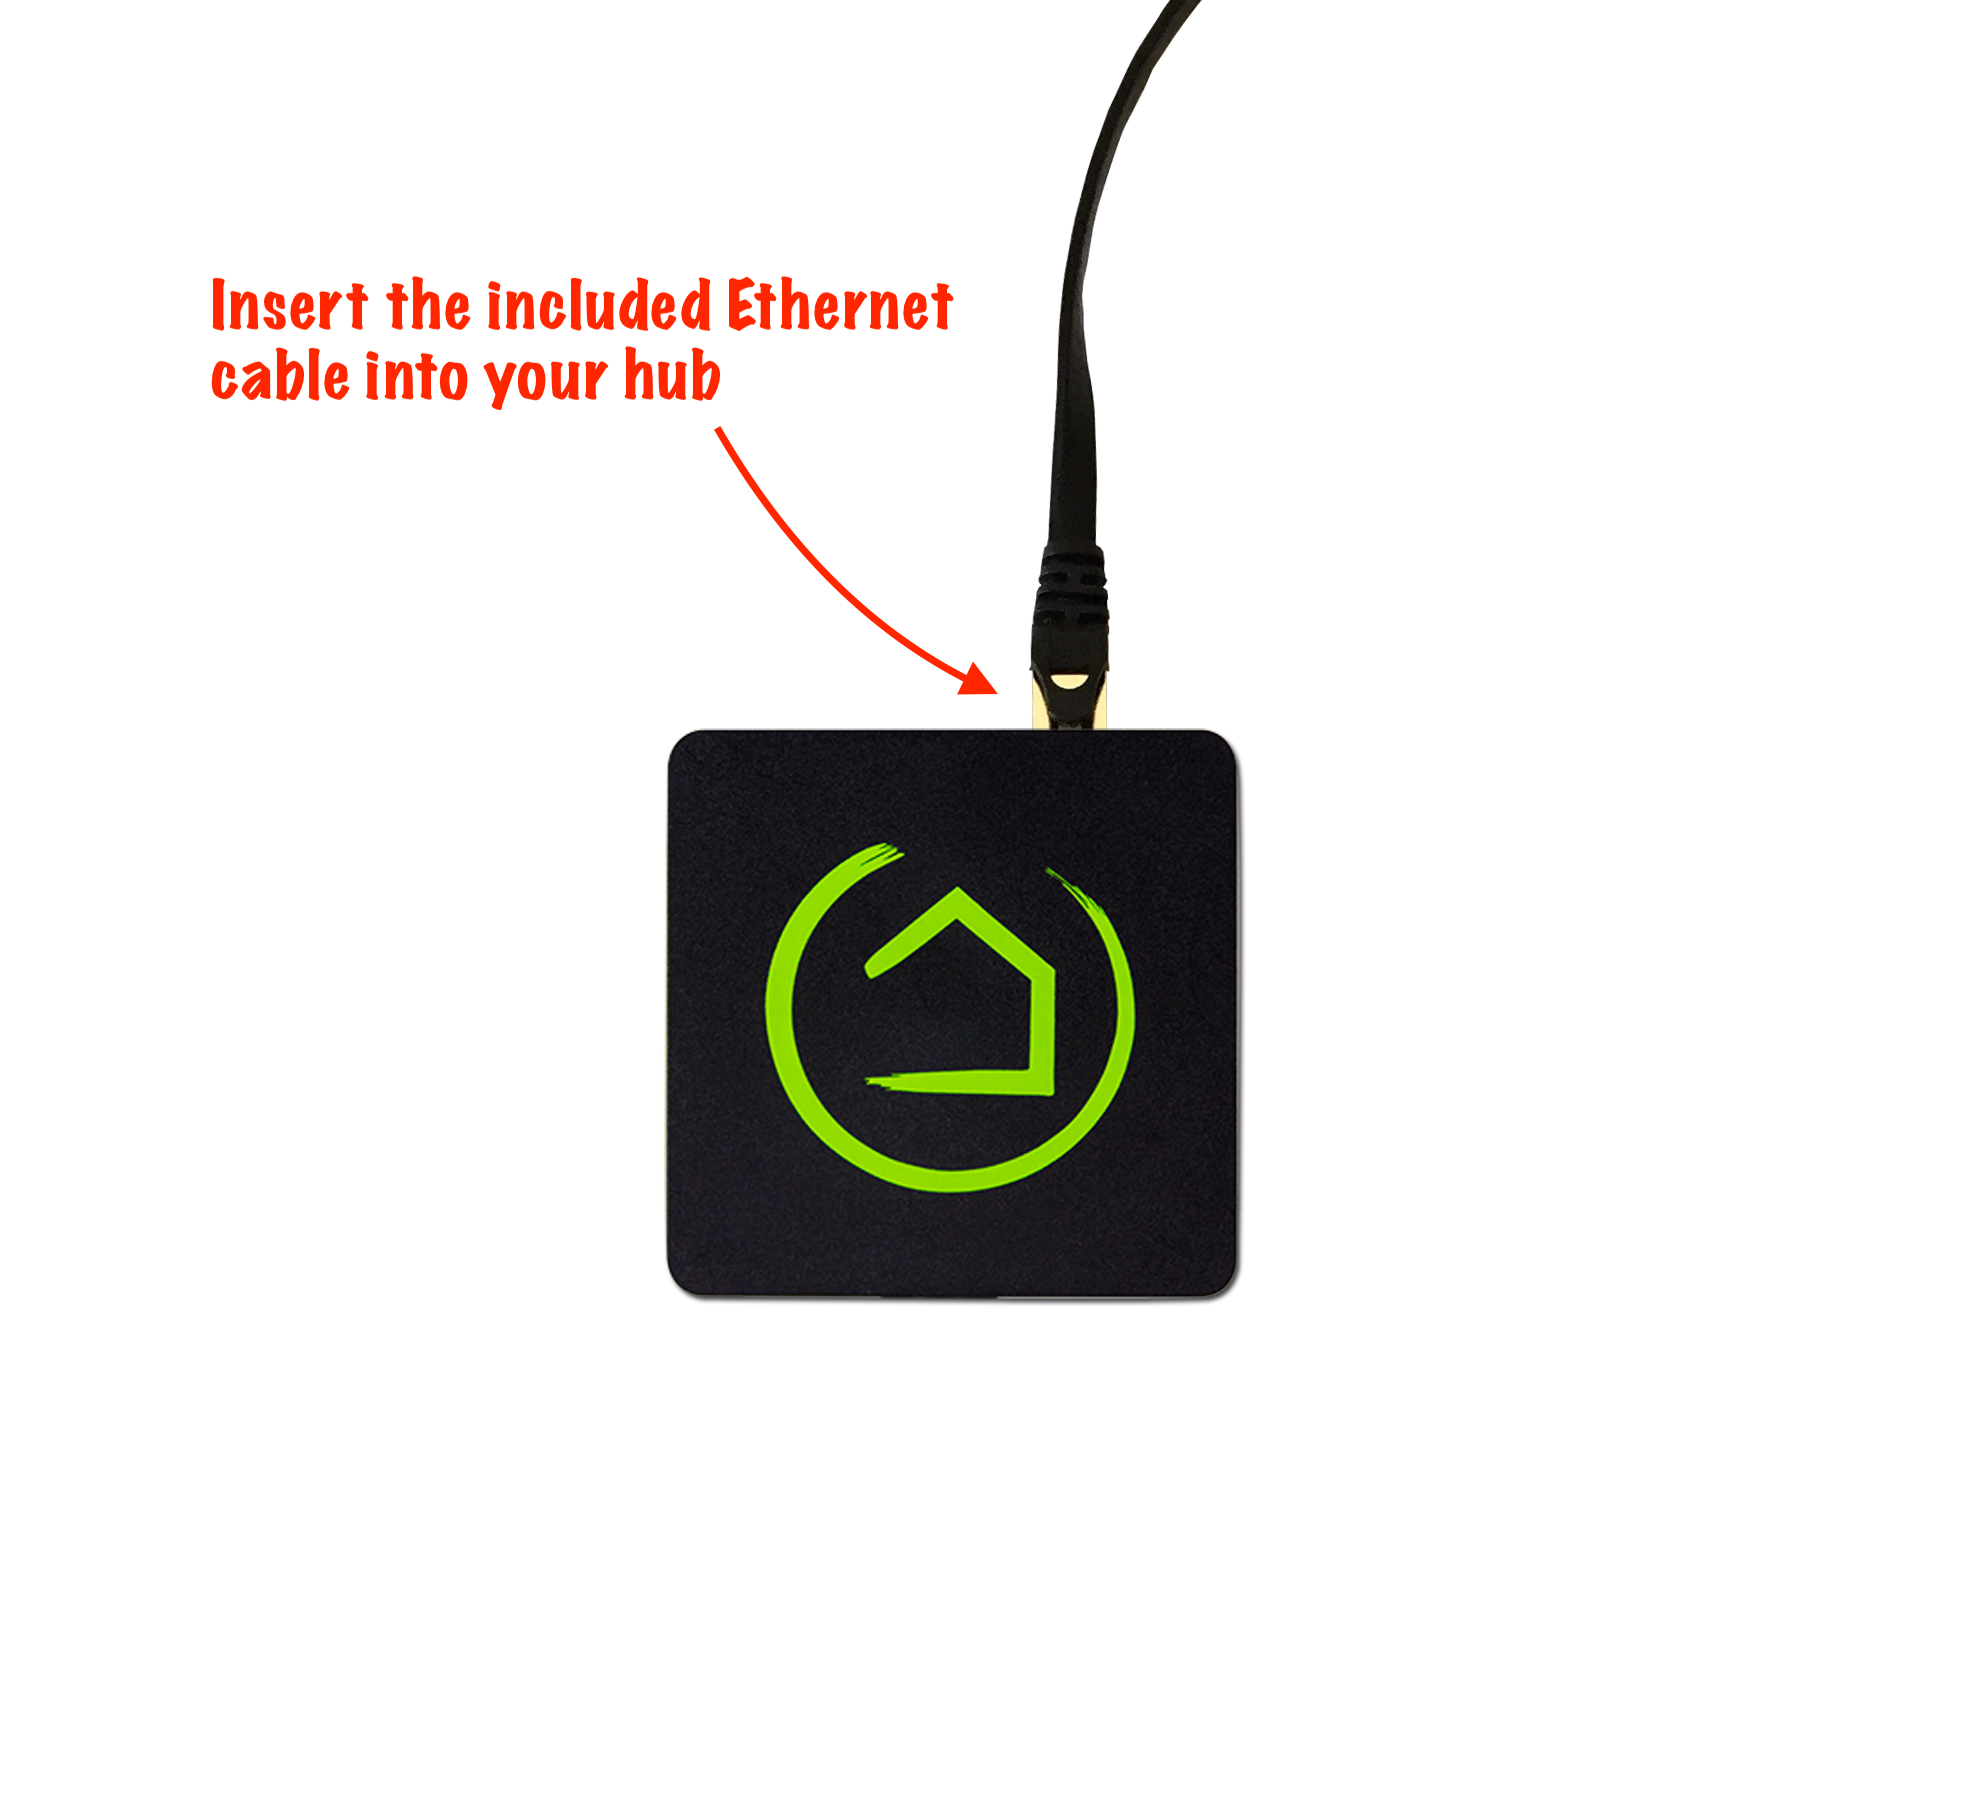 Photo: Insert included Ethernet cable into hub